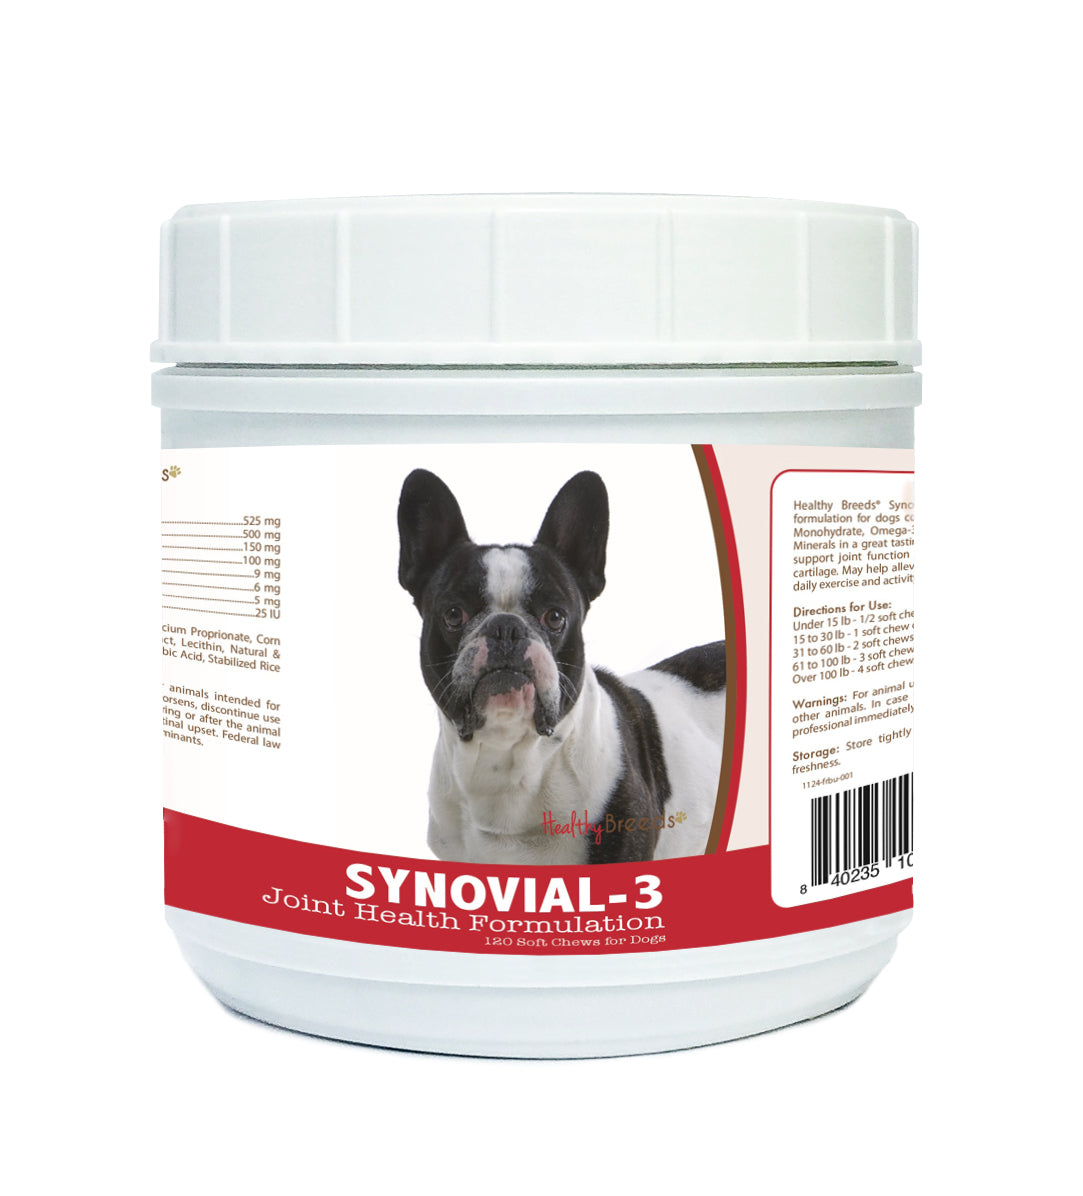 French Bulldog Synovial-3 Joint Health Formulation Soft Chews 120 Count